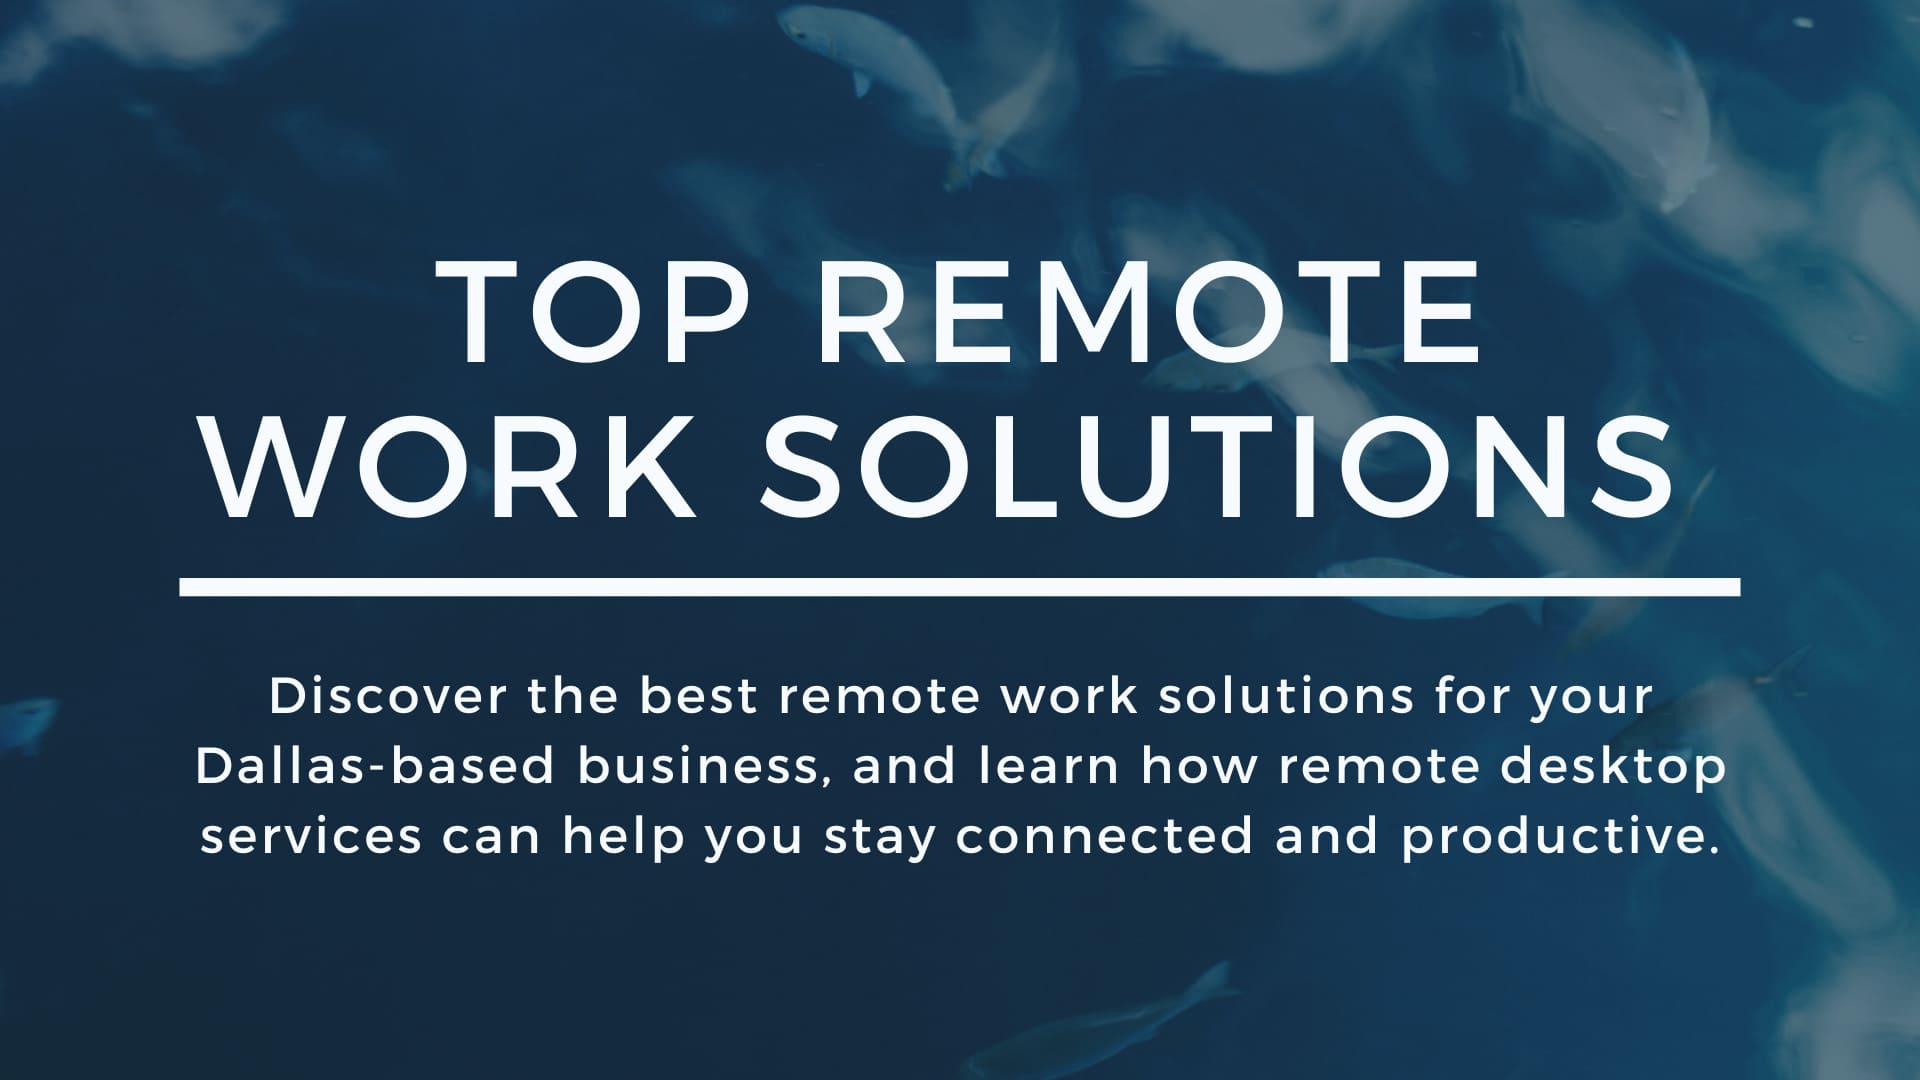 Top Remote Work Solutions